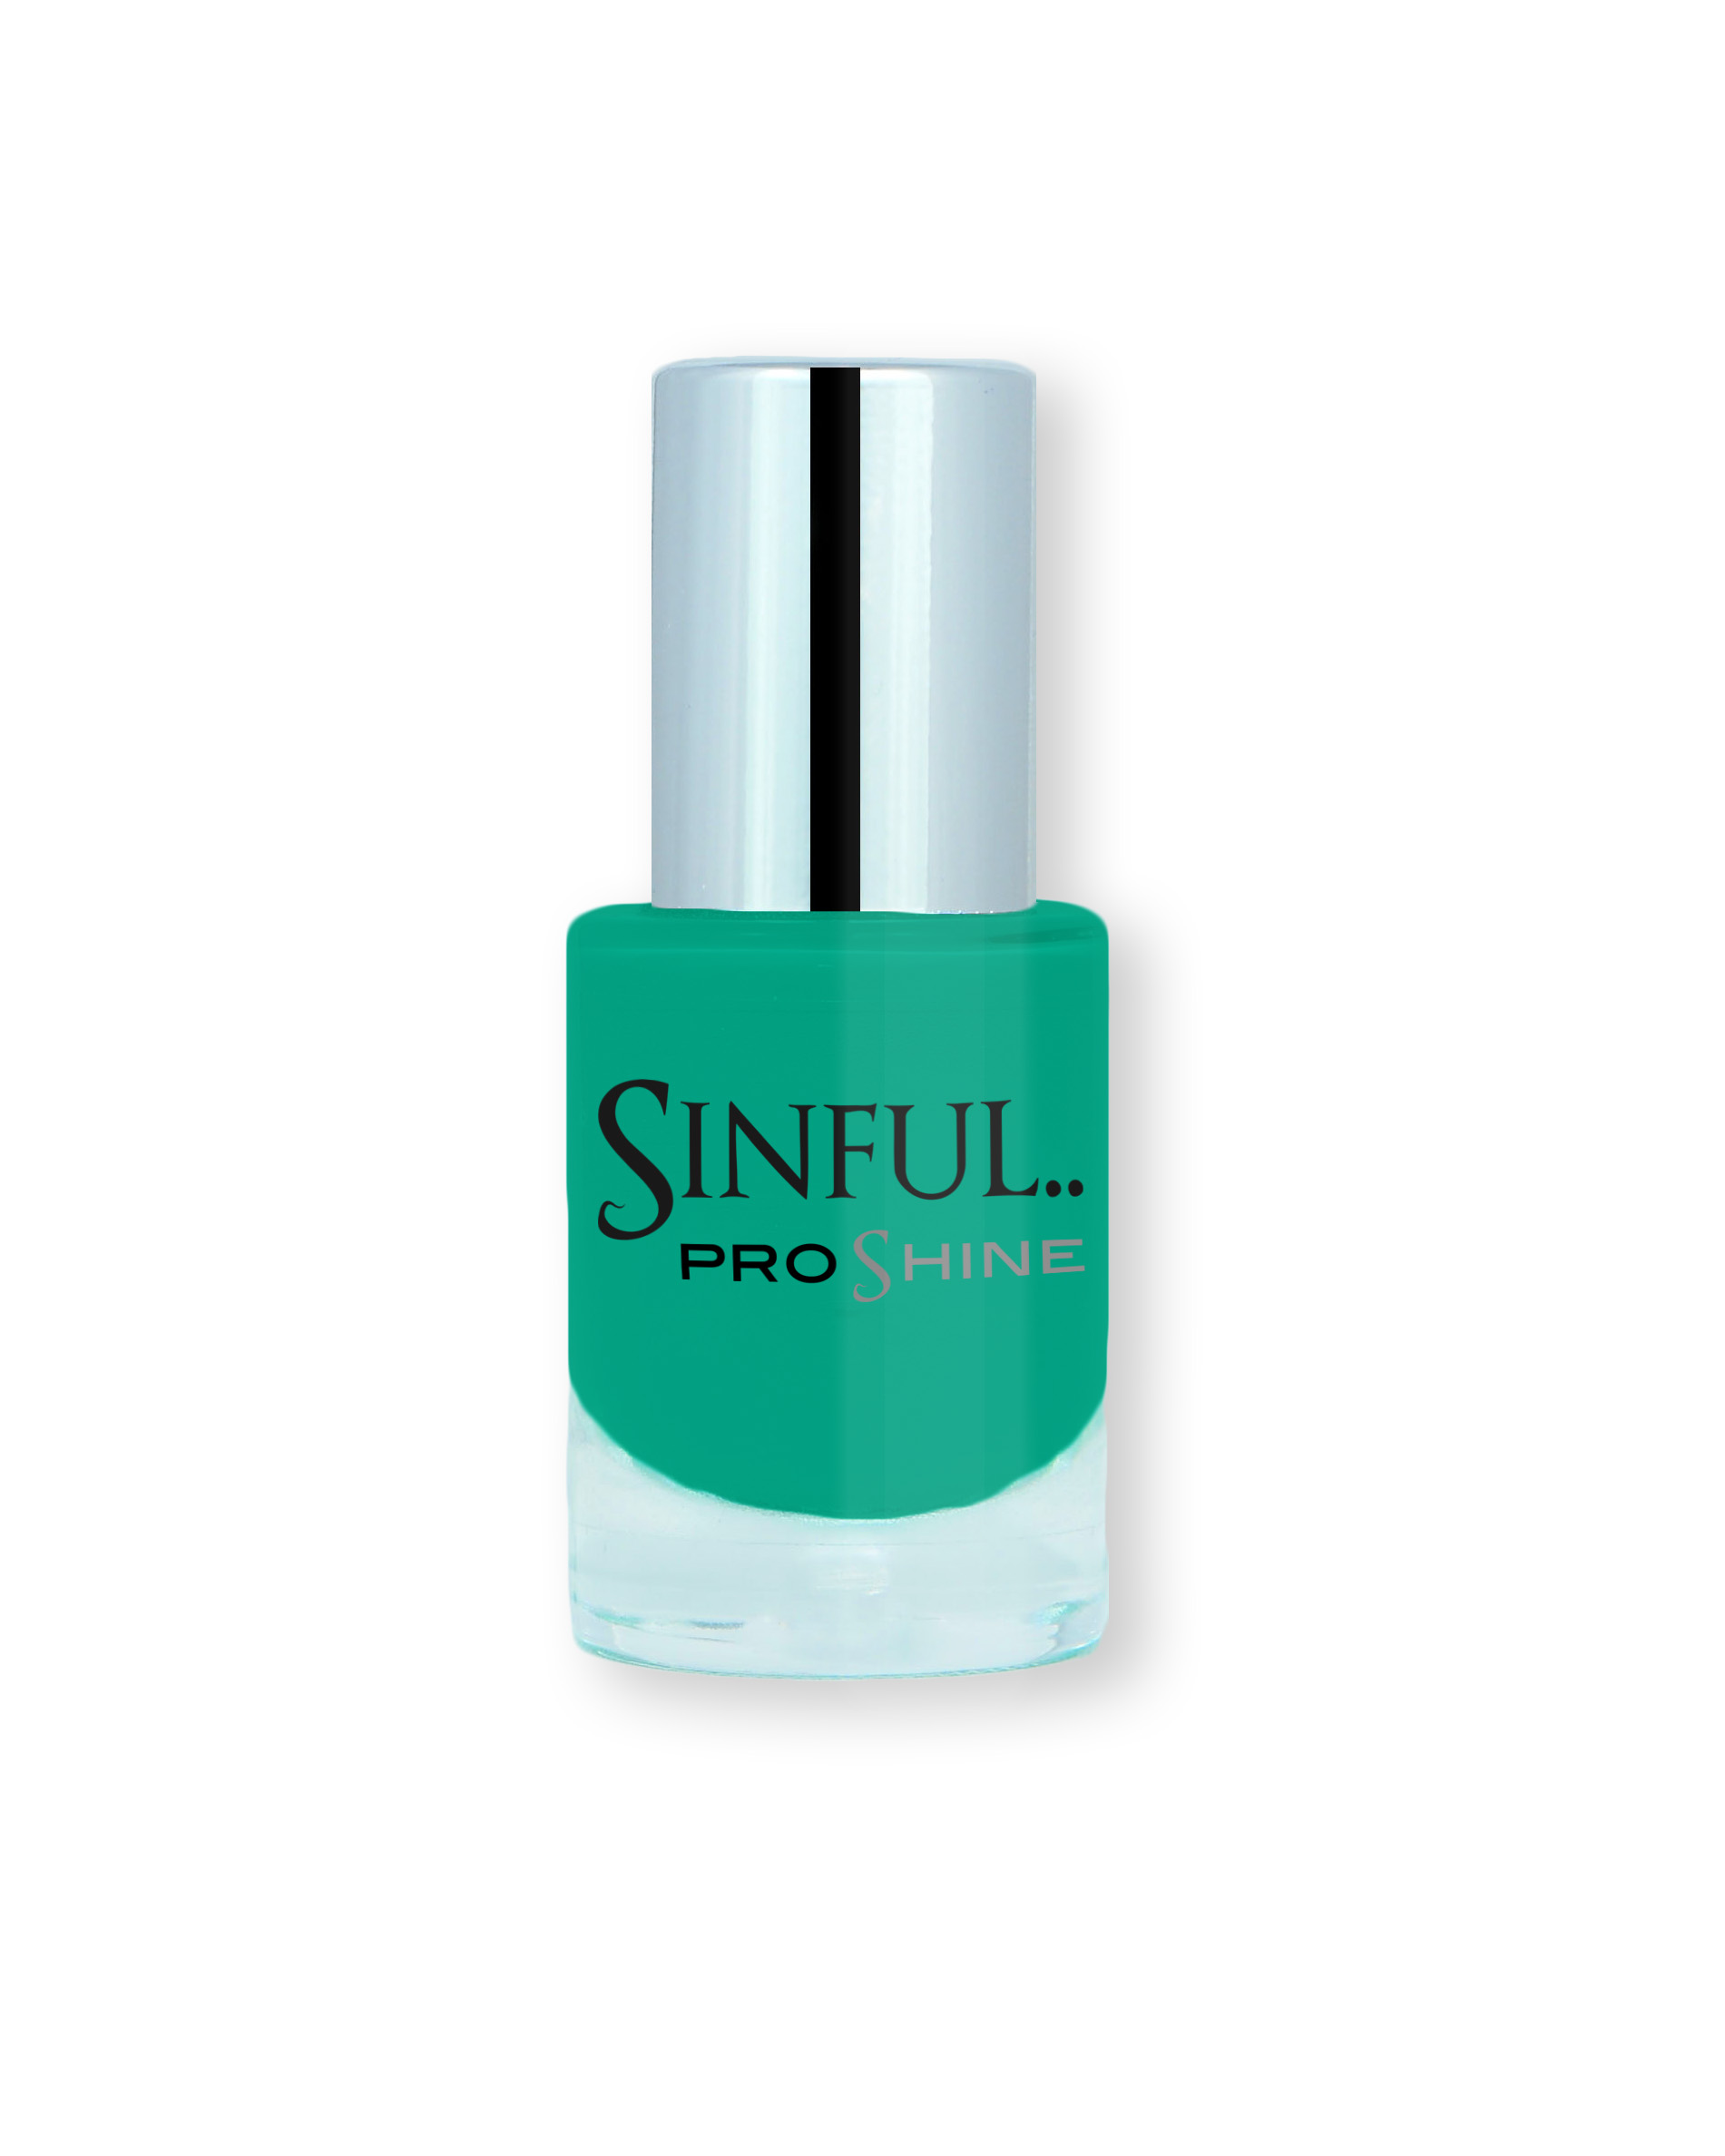 Sinful PROshine is a revolution into top spec imitation gel-like formula, easy application, full coverage and a sleek finish. Spoil yourself with the choice of 42 shades, expertly formulated with the finest grade of pigments. Date Night: Vibrant emerald, with a rich creme finish